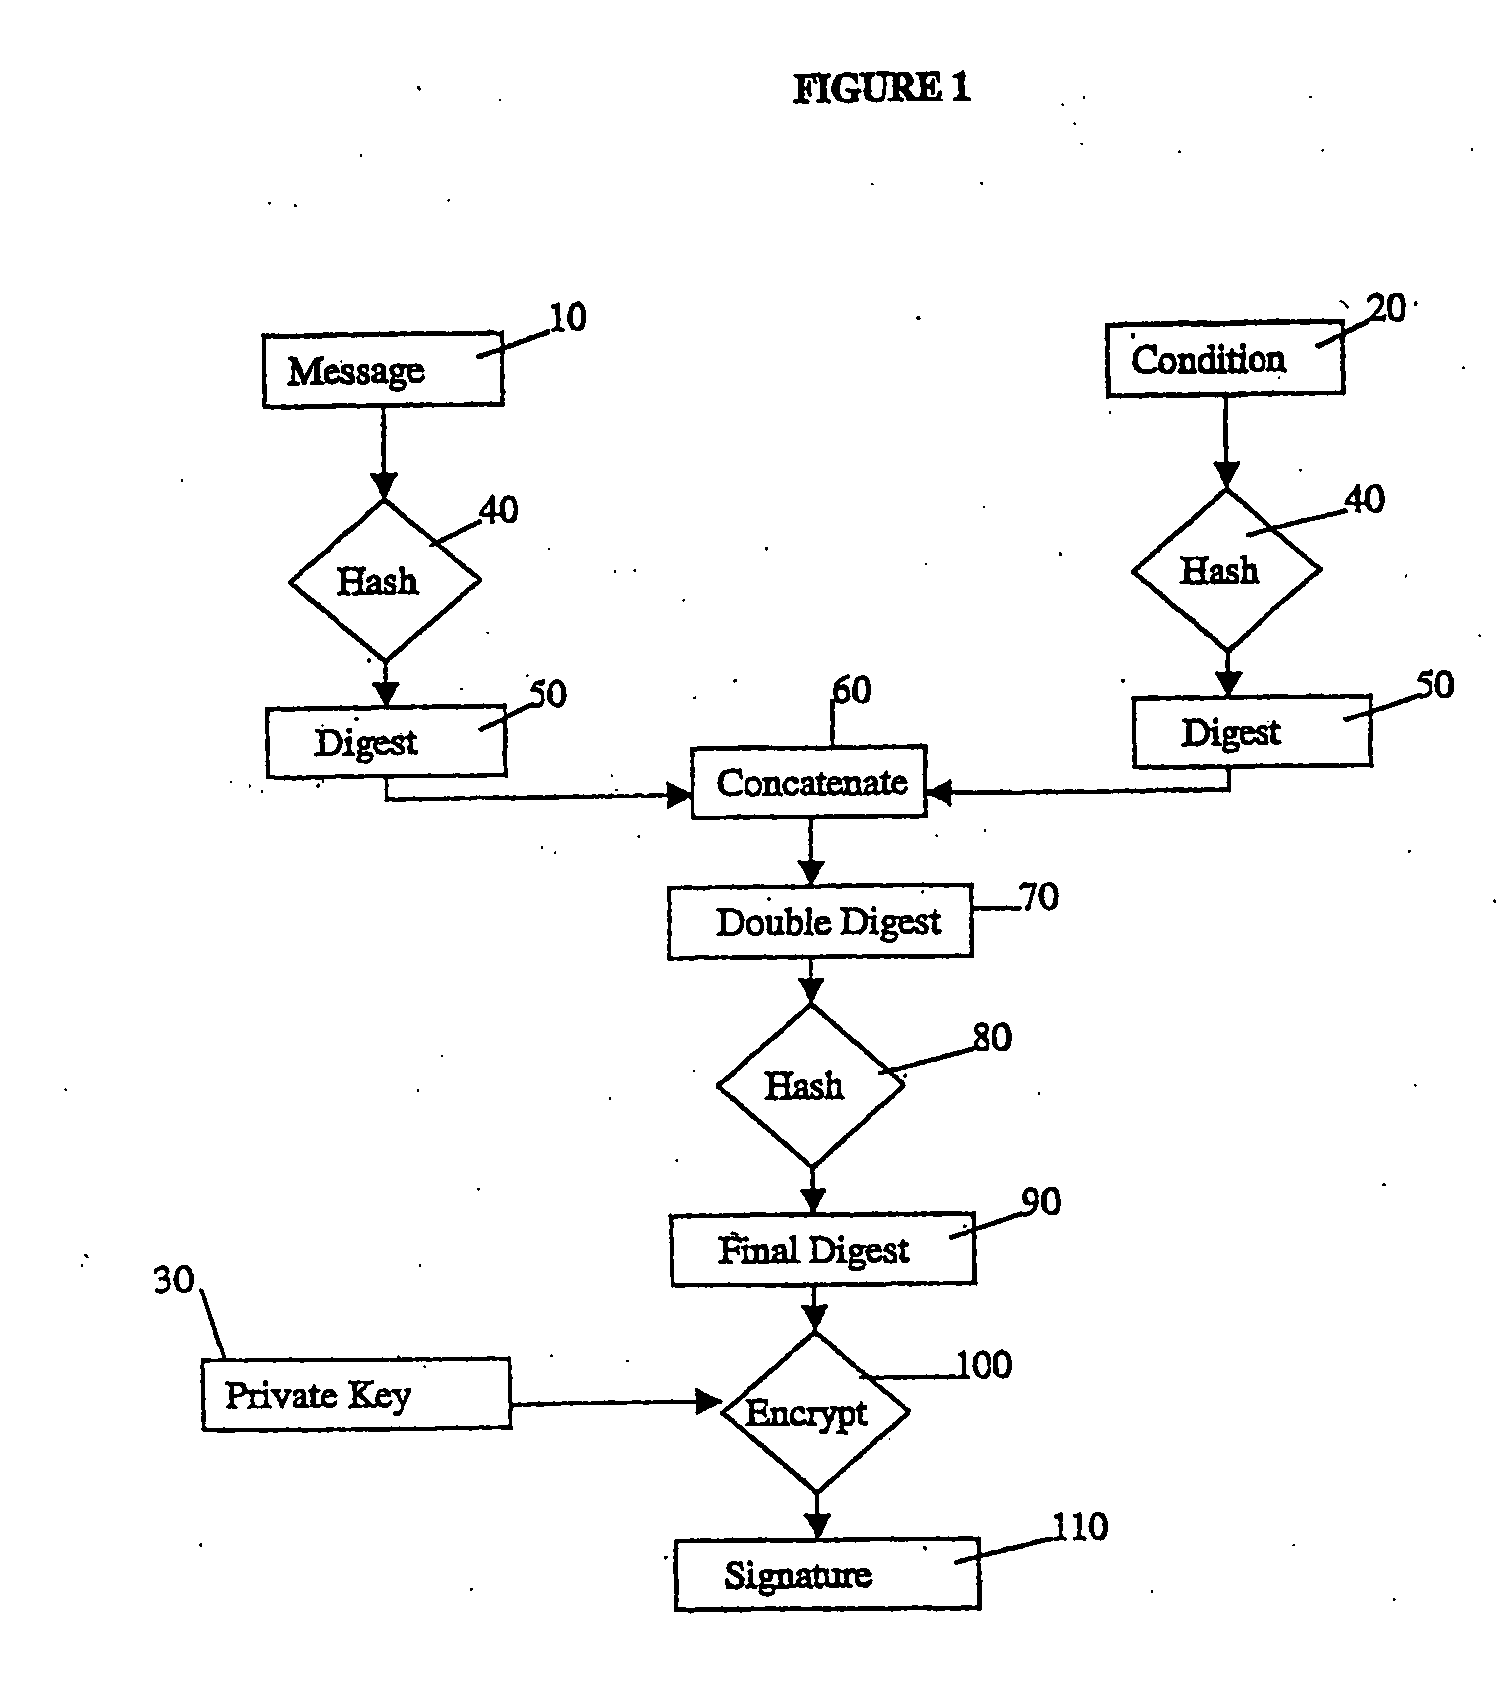 Methods, Apparatus And Computer Programs For Generating And/Or Using Conditional Electronic Signatures For Reporting Status Changes